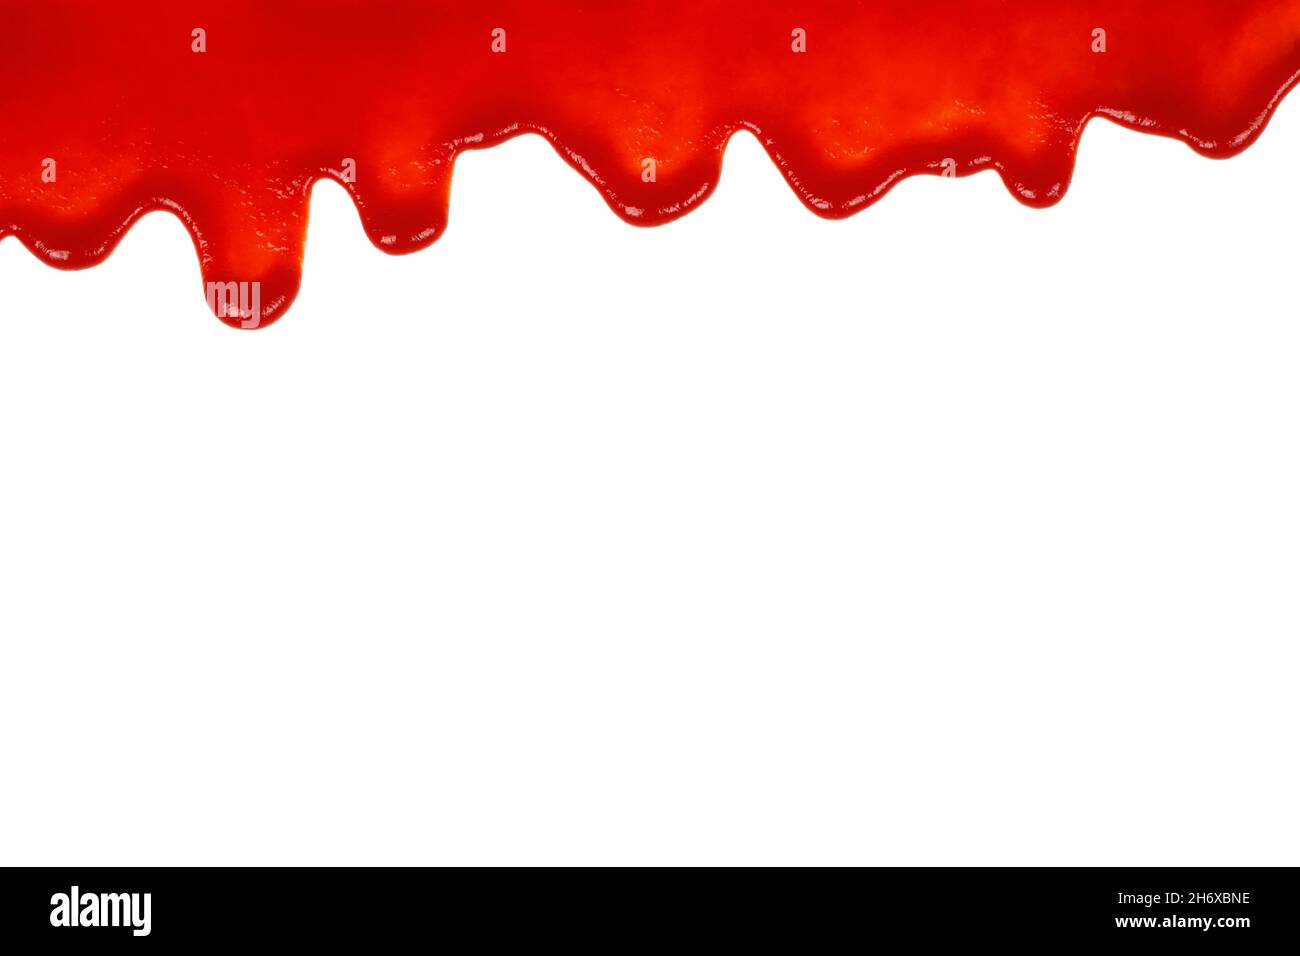 Red ketchup dripping on white background close-up Stock Photo